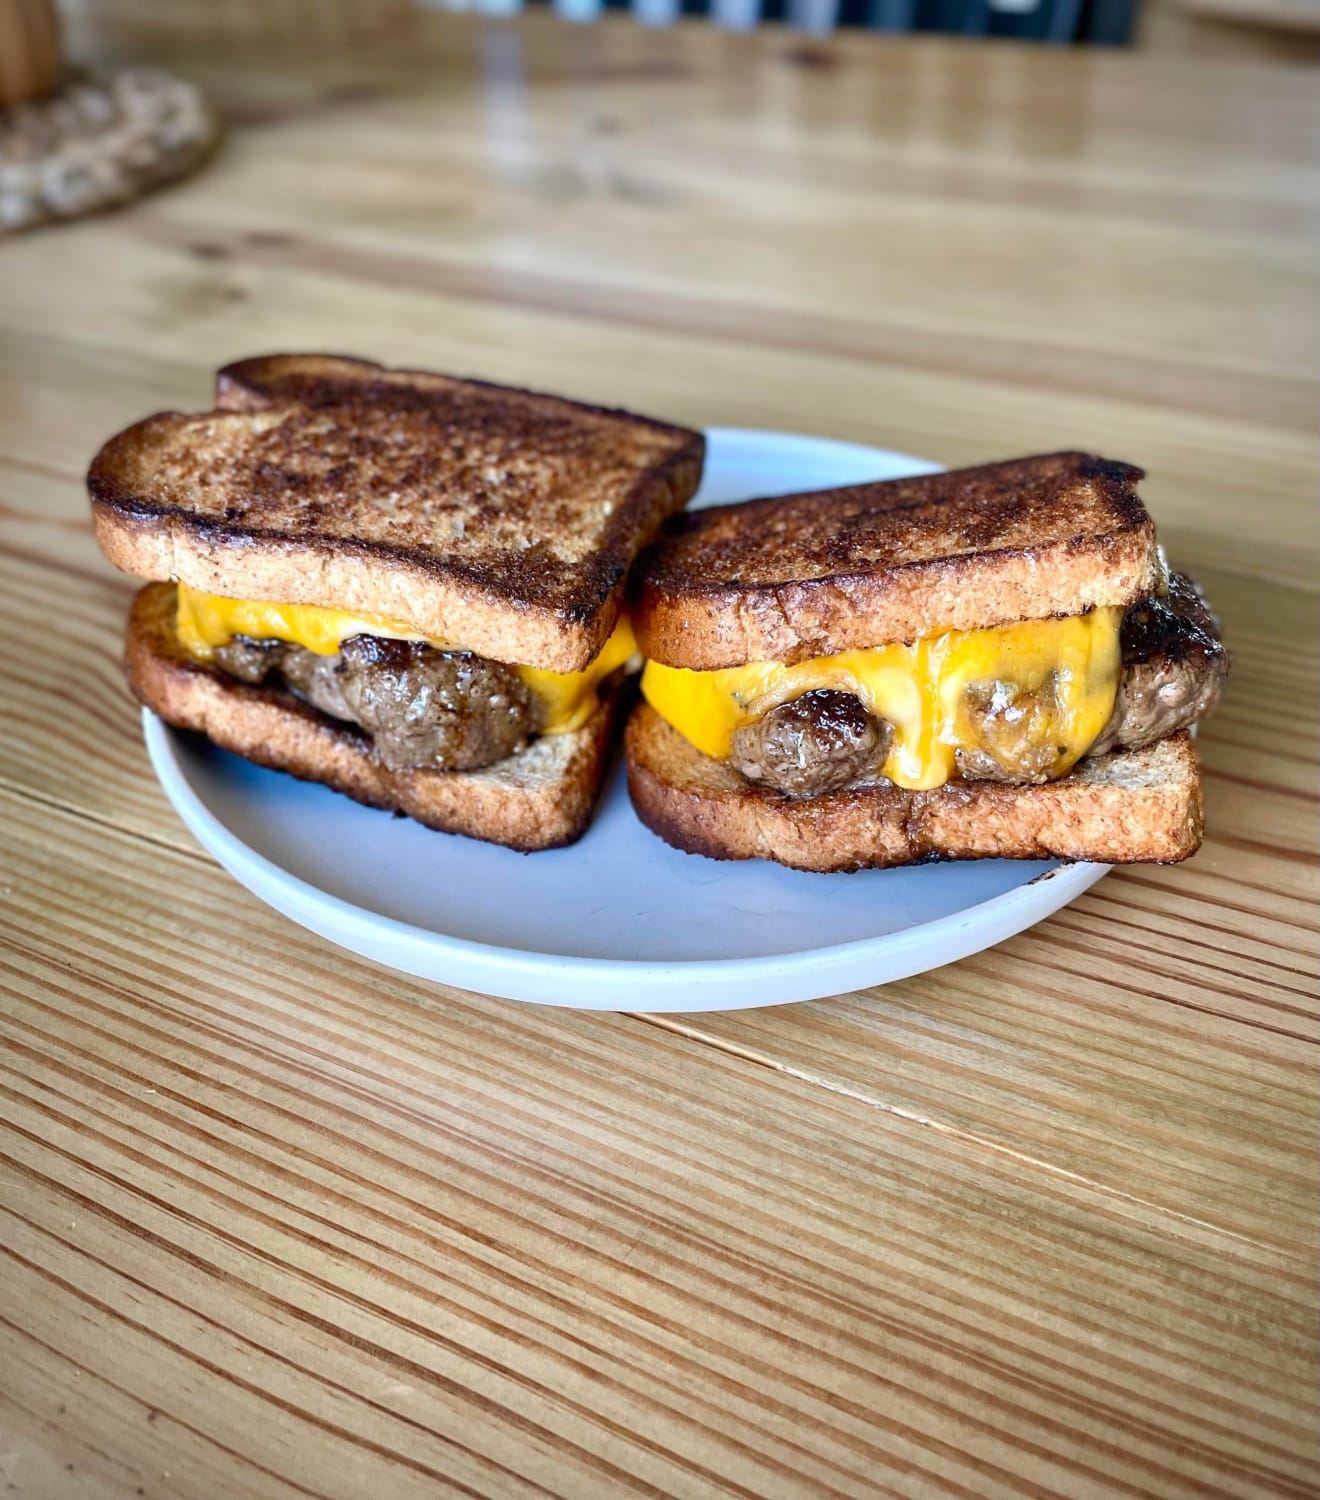 [homemade] Prime ground beef with Cheddar, Provolone, and Gouda on toasted bread.